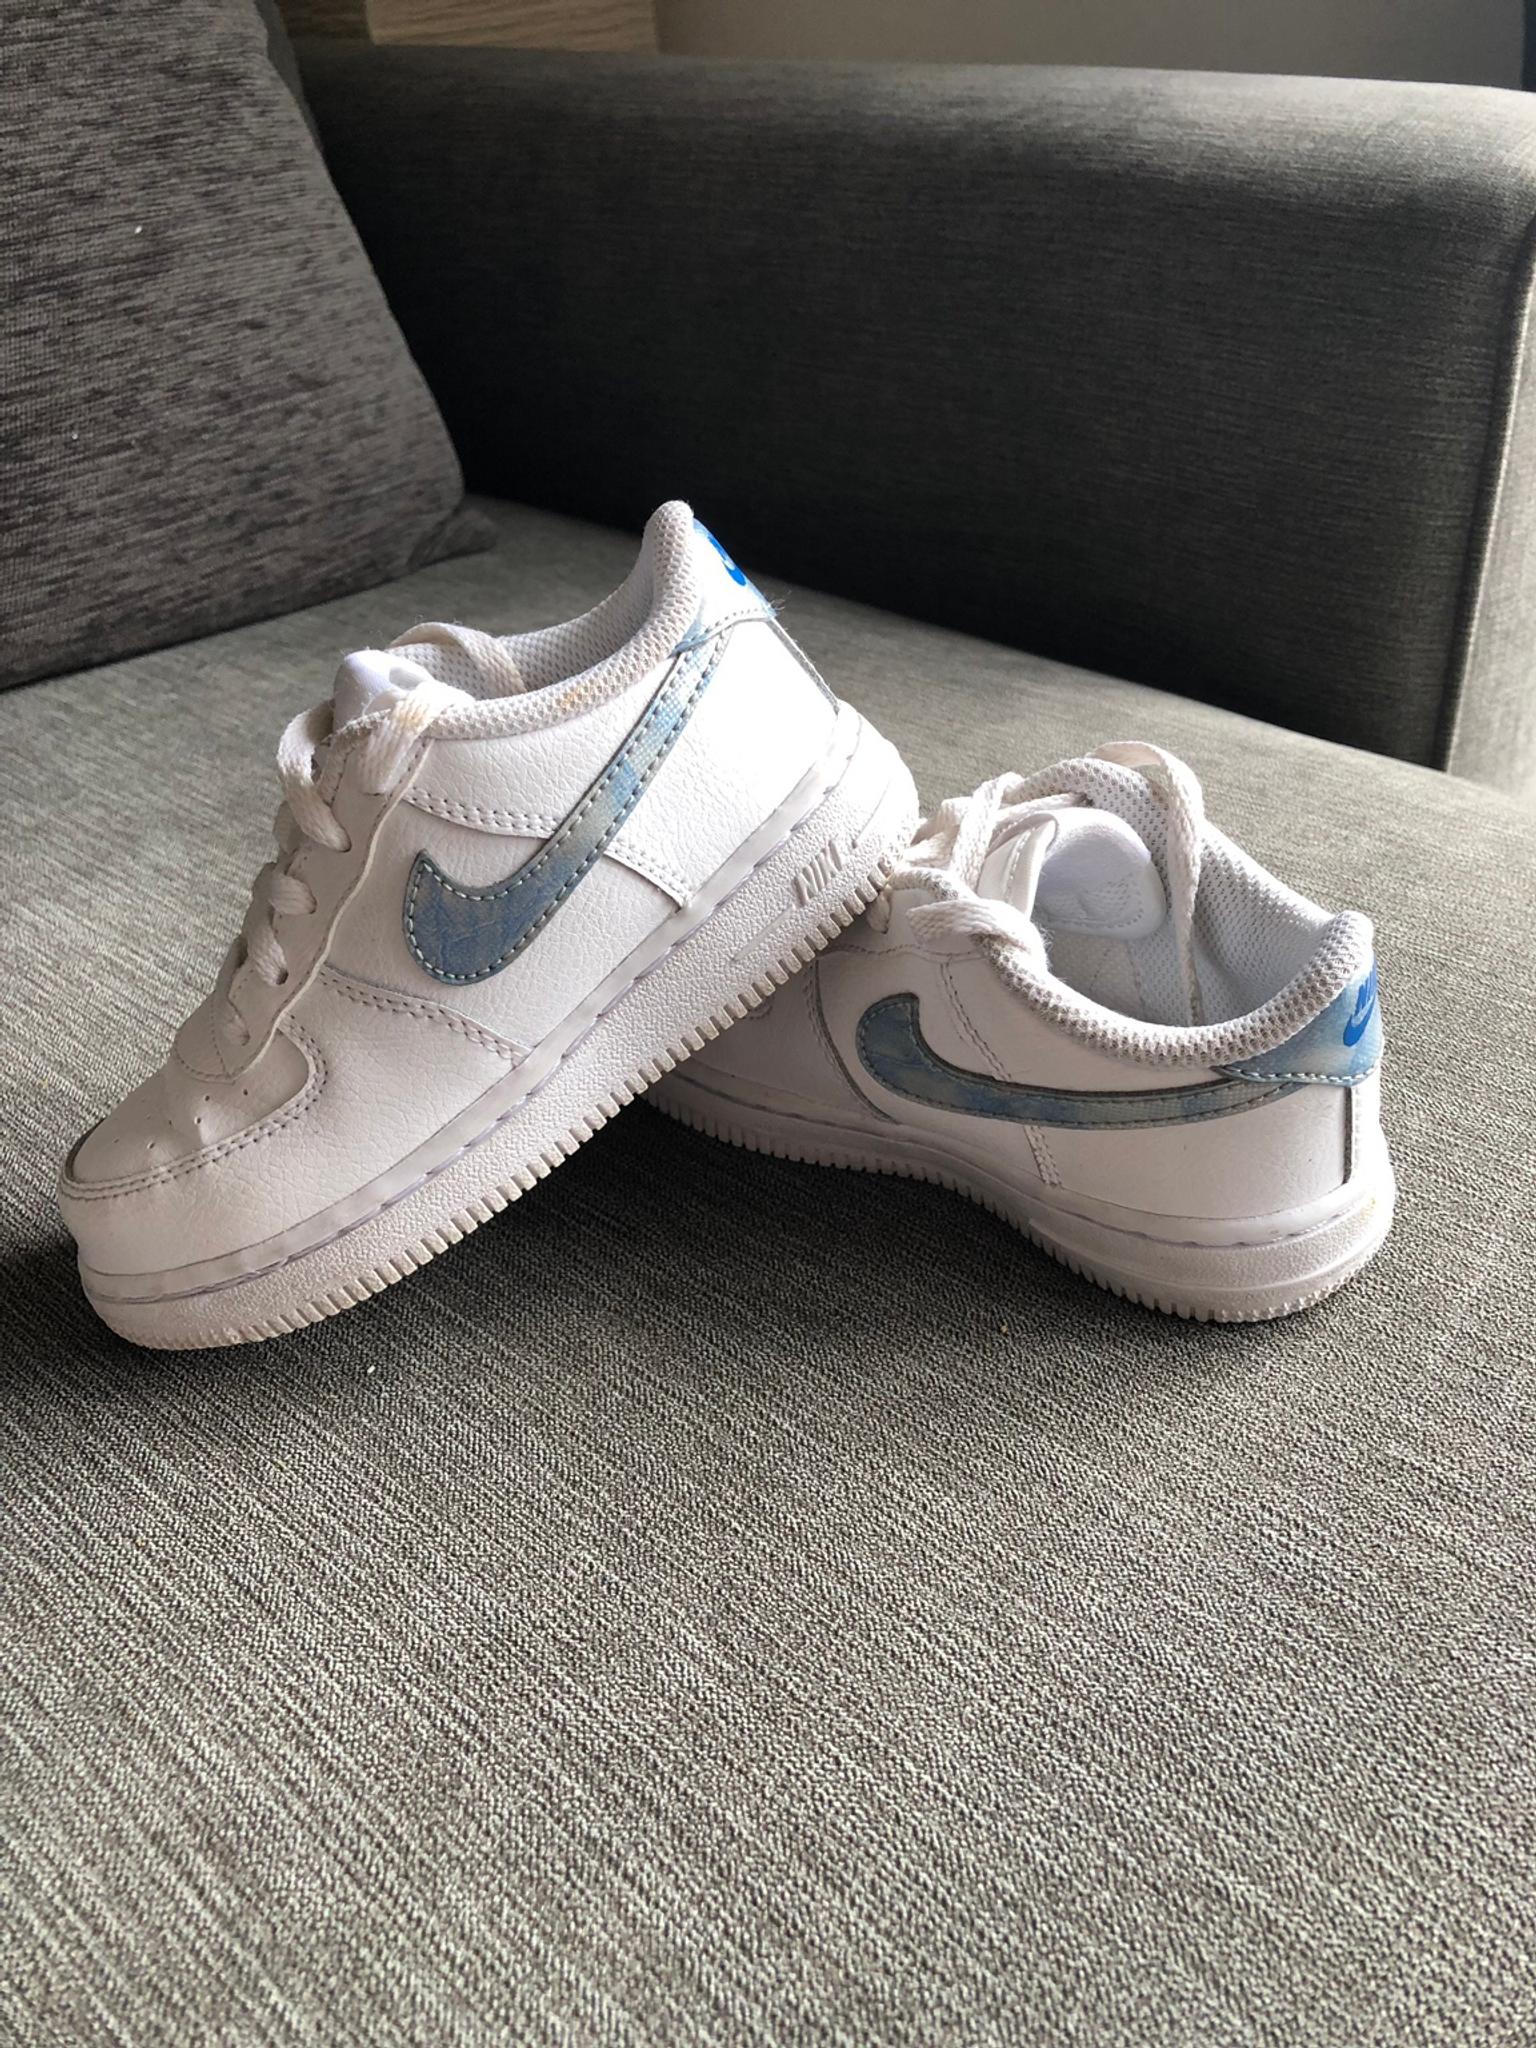 Nike Air Force 1 low infant 8.5 in B77 